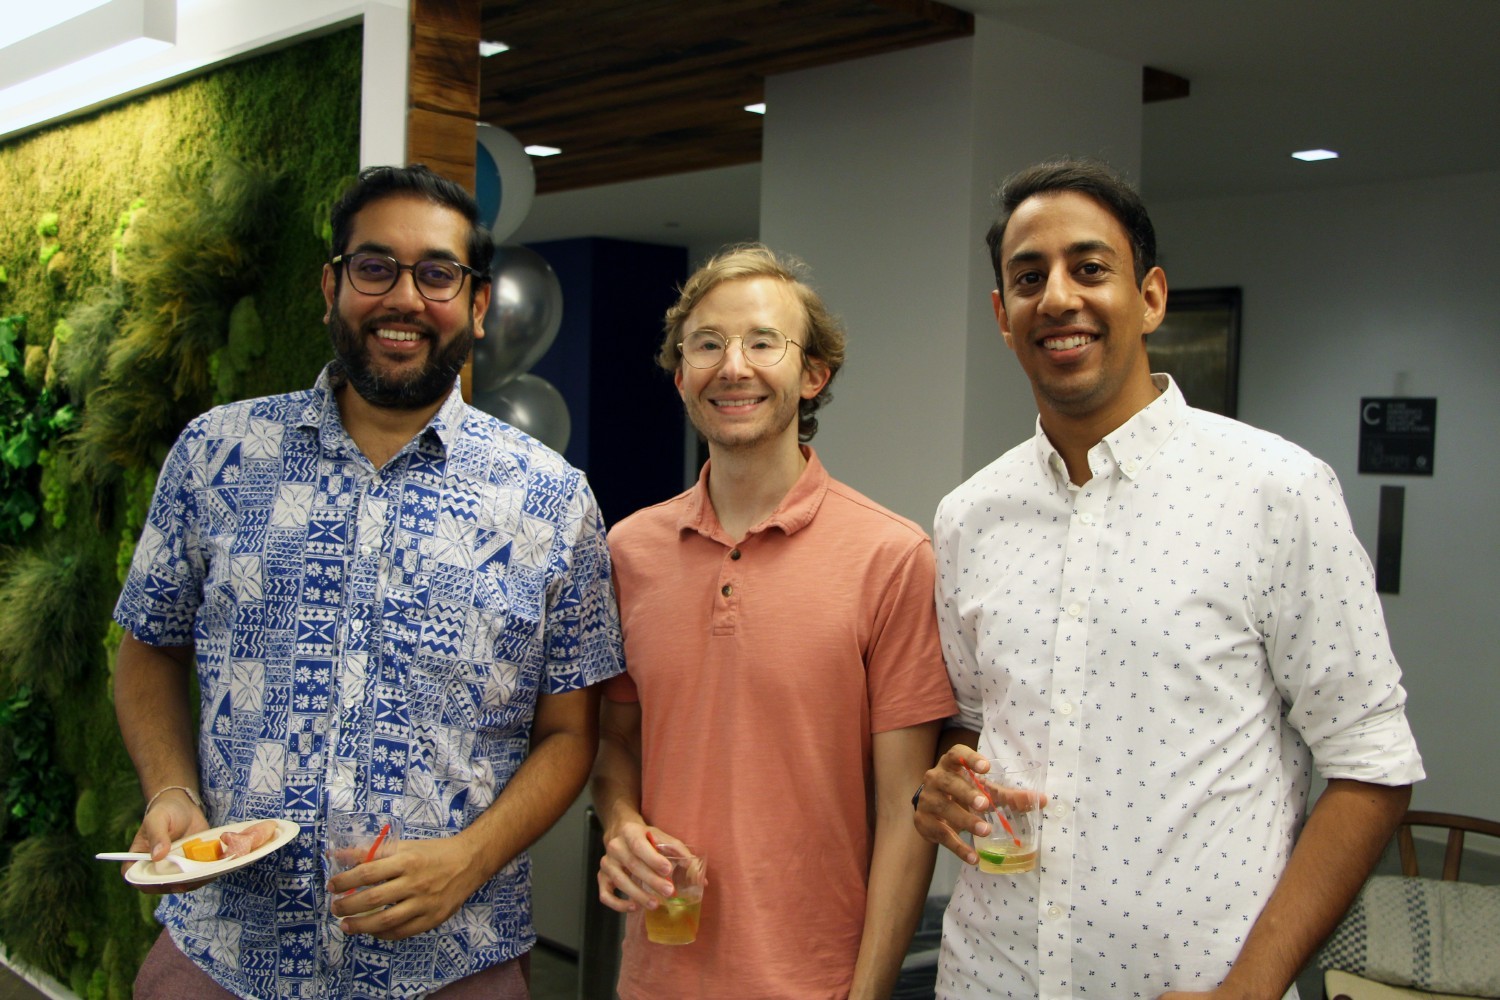 Members of our Engineering Team, including our CTO & Co-Founder Kinesh Patel, pose for a photo at a SevenRooms event.
